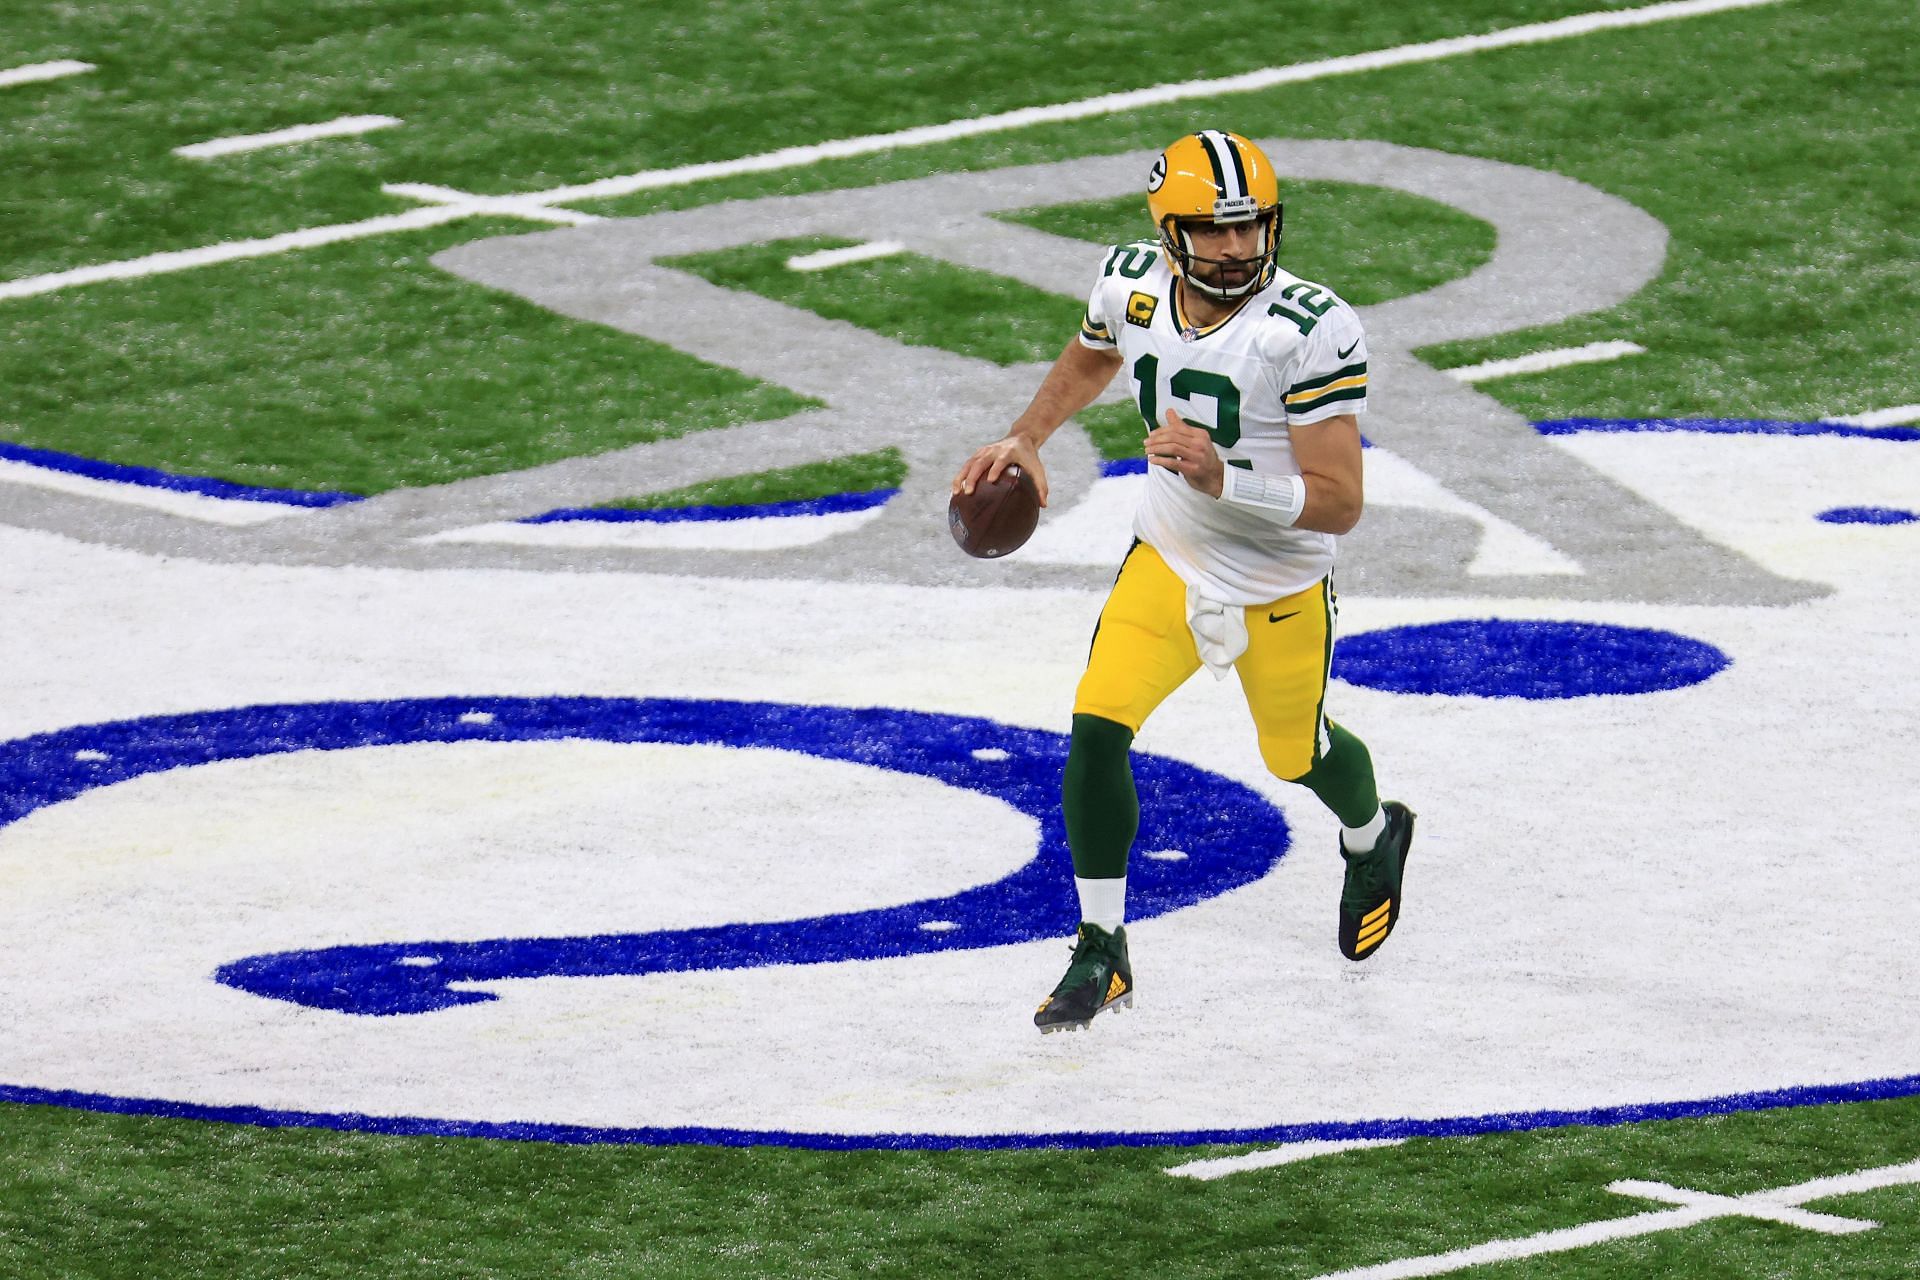 Green Bay Packers quarterback Aaron Rodgers vs. Indianapolis Colts